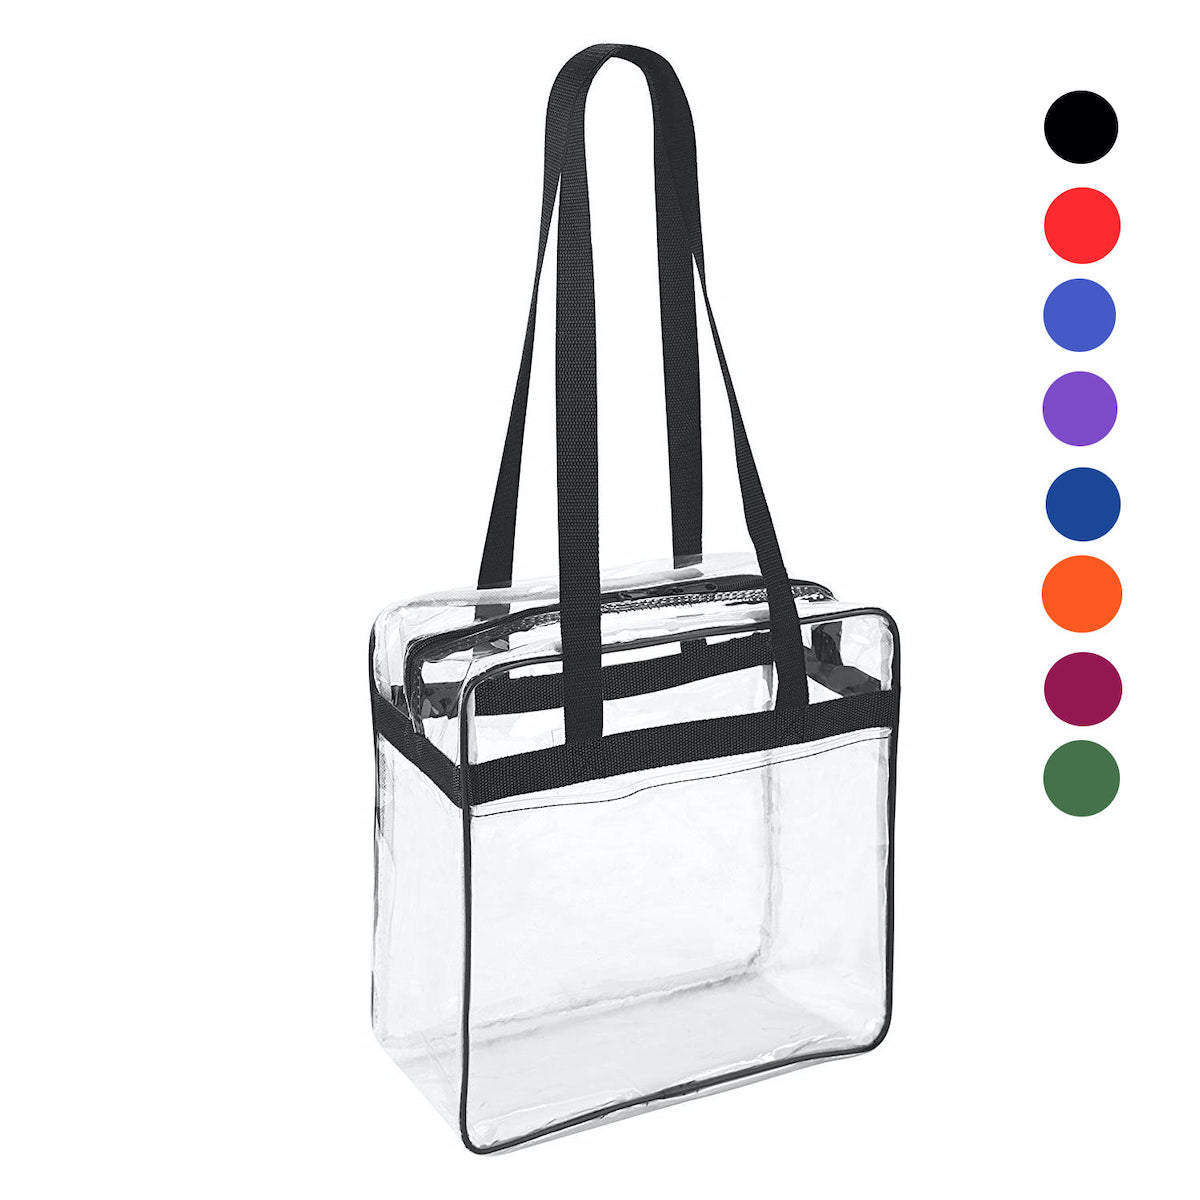 Dodger Clear Bags Stadium Tote Bag With Zipper Closure 